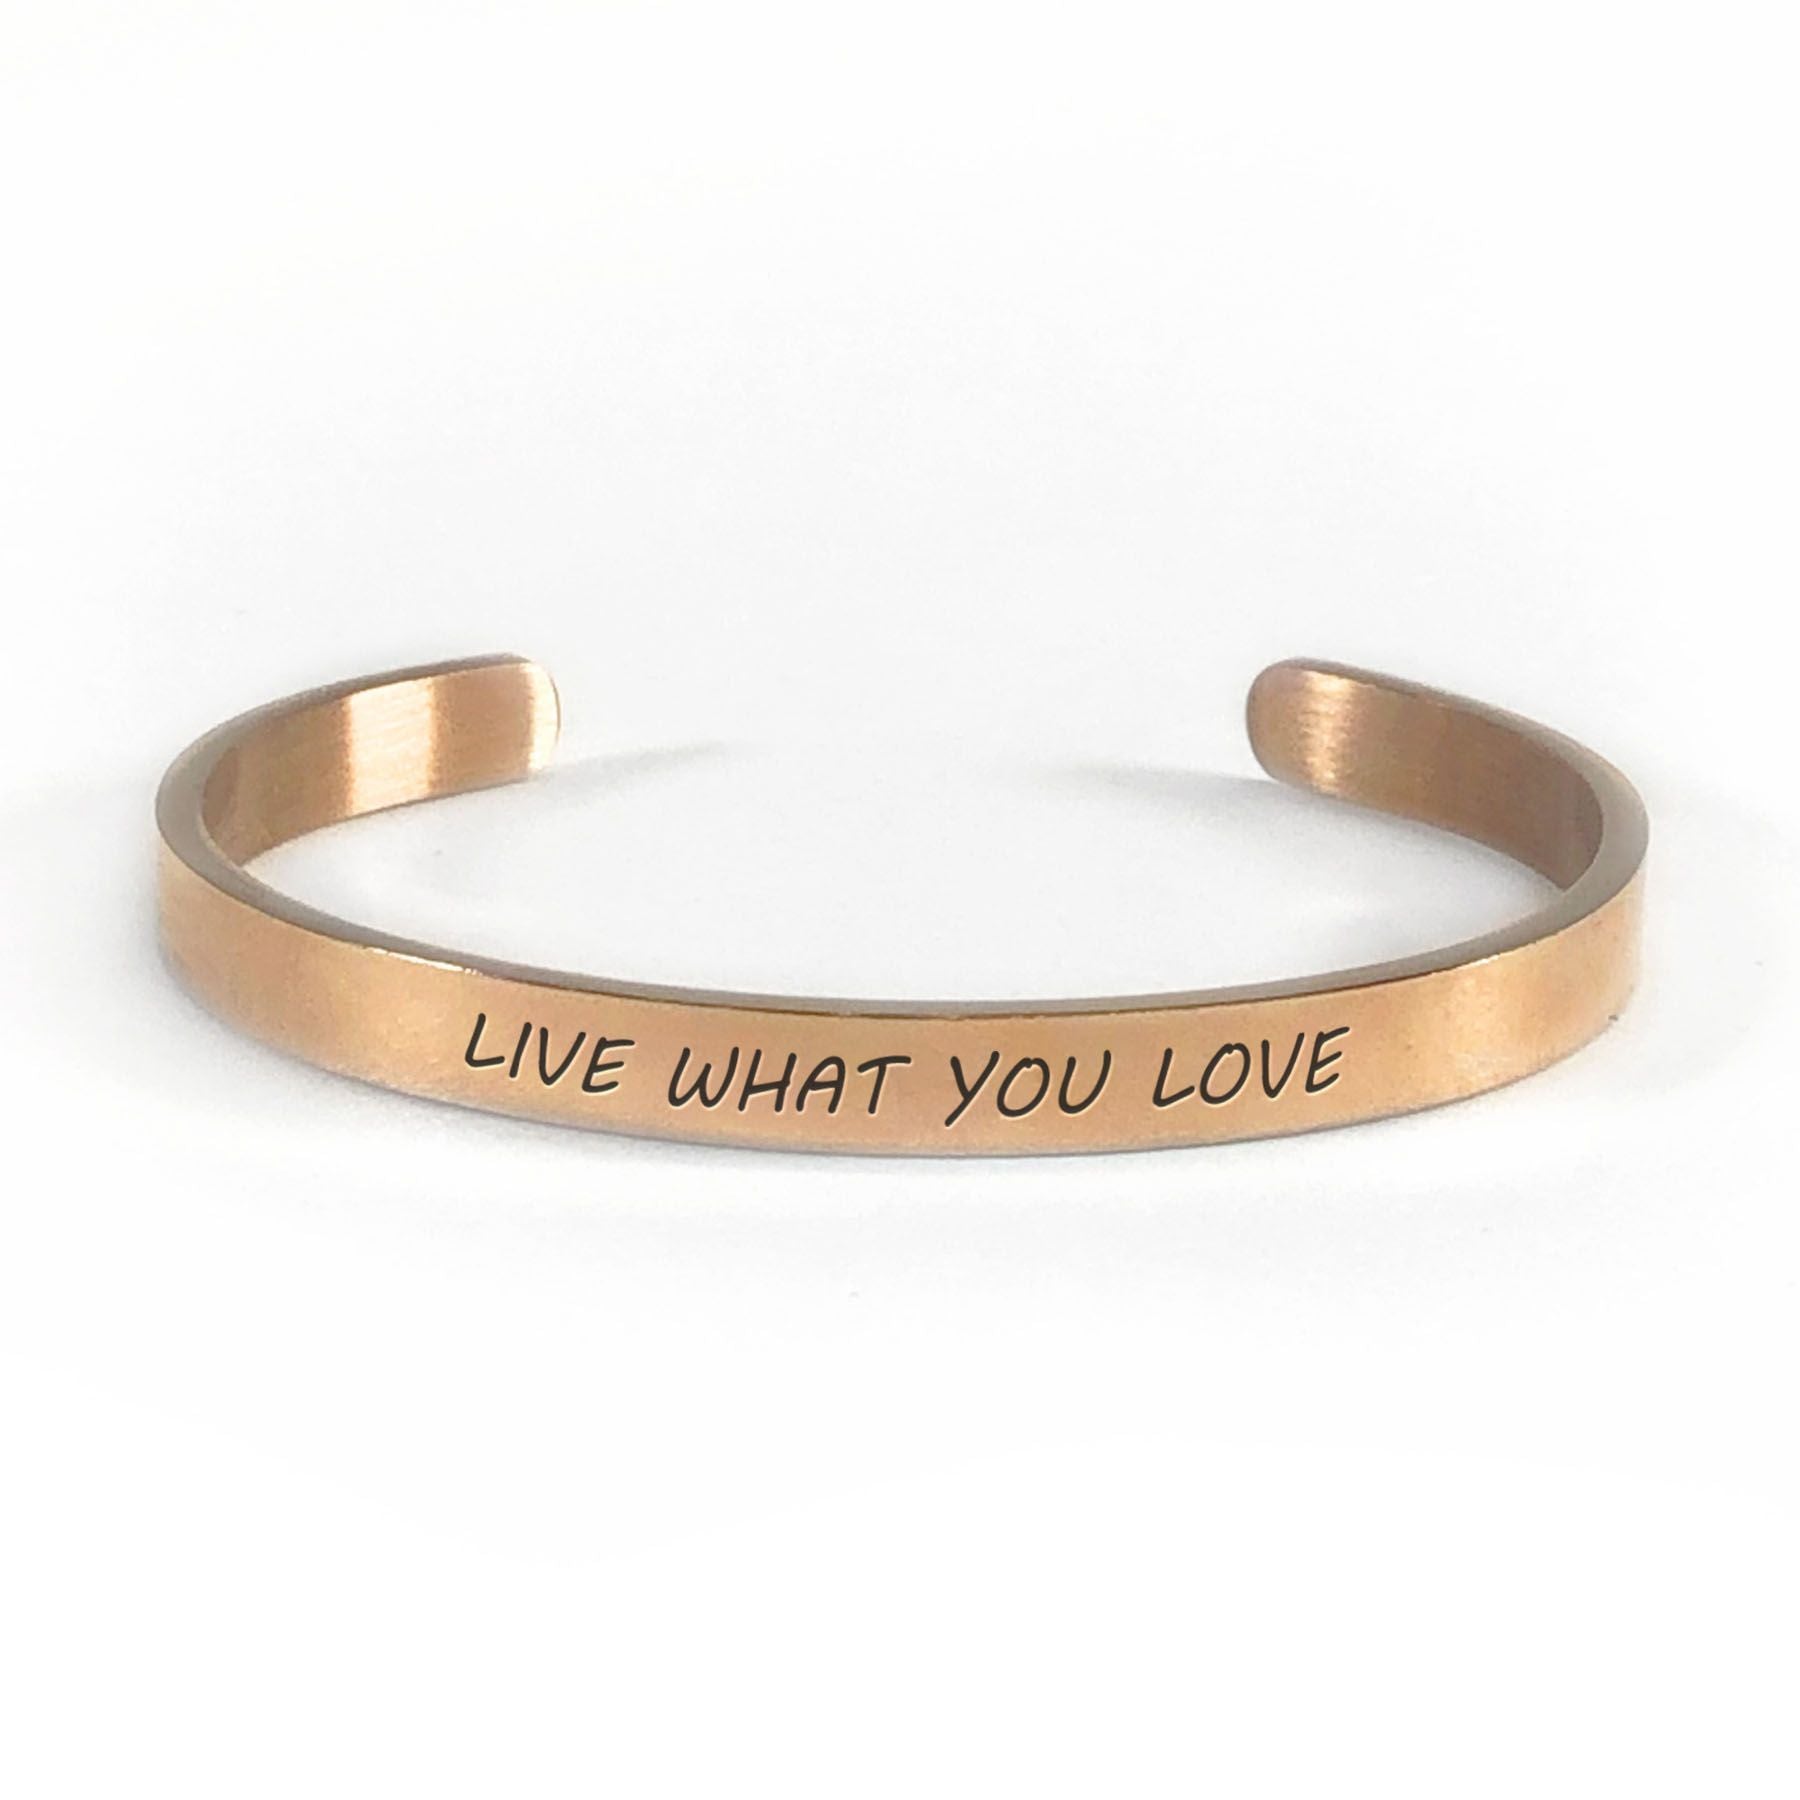 Live what you love bracelet with rose gold plating